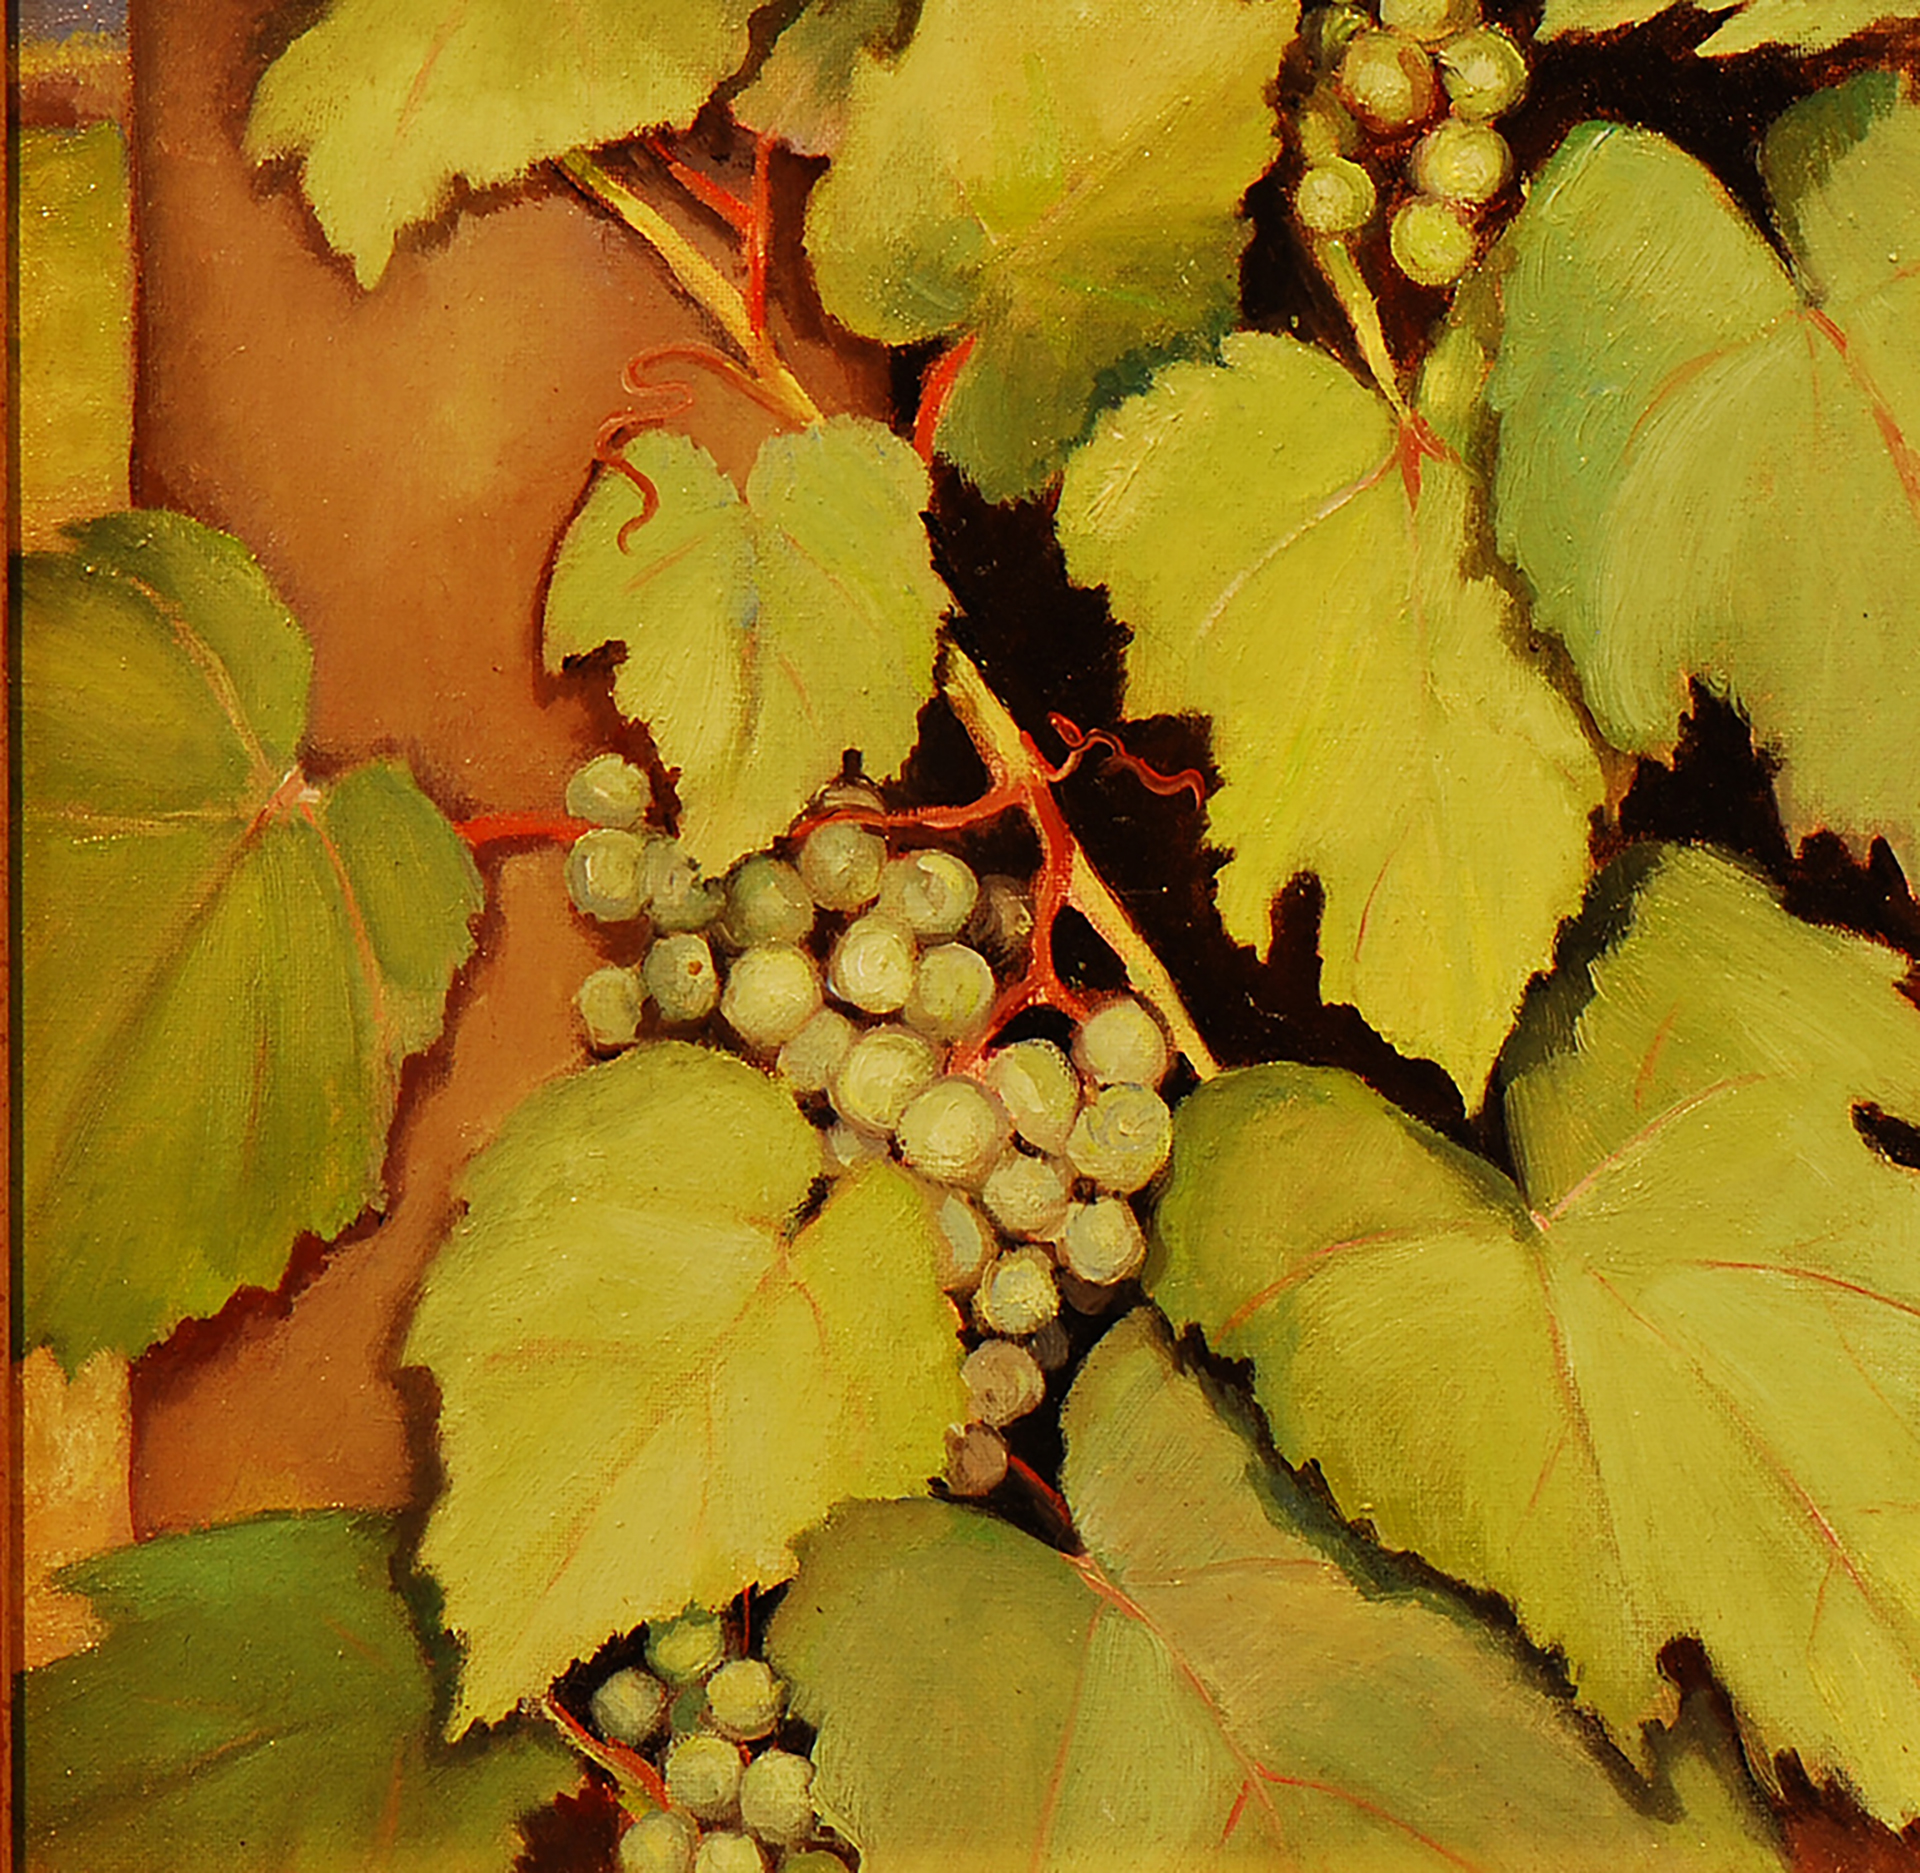 Grapes in June, Italy, Fleur Palau, oil on canvas , 6x8